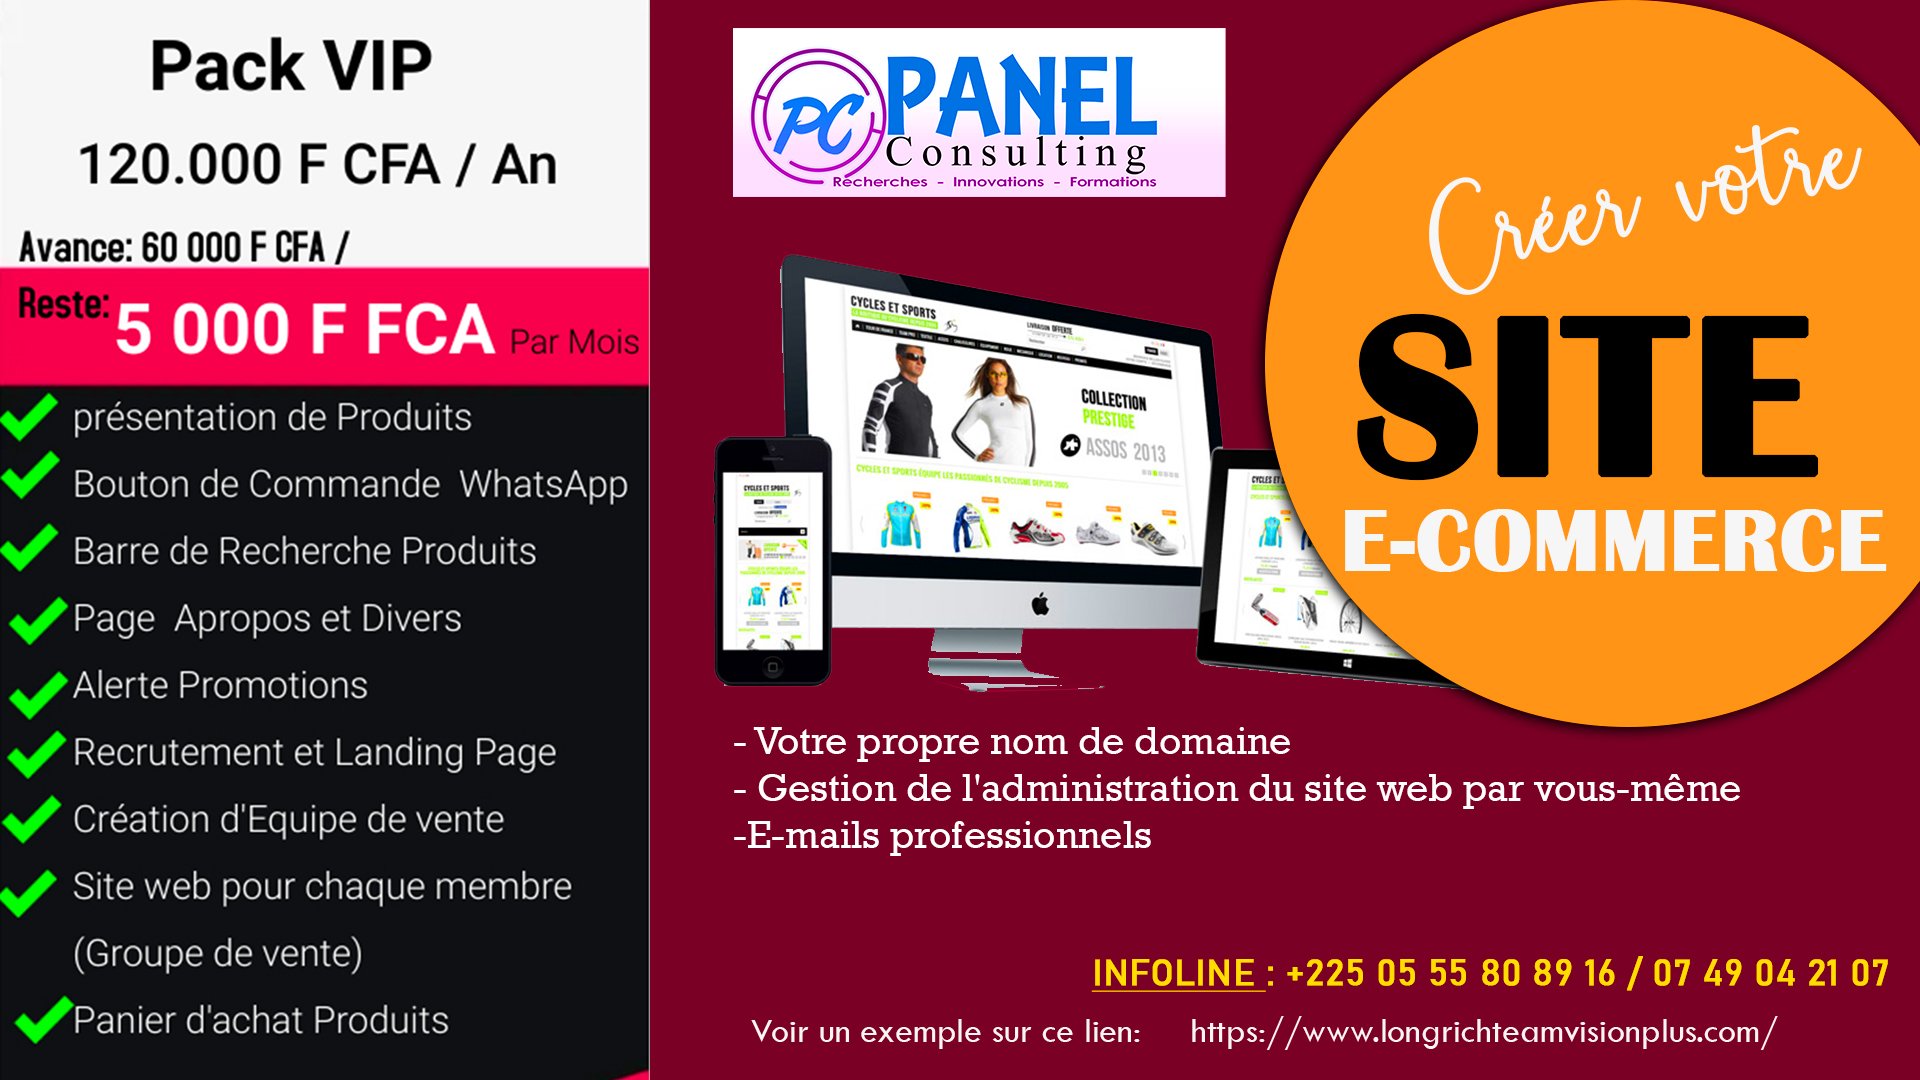 ceration-boutique-en-ligne-pack VIP-panel-consulting.jpg-panel-consulting